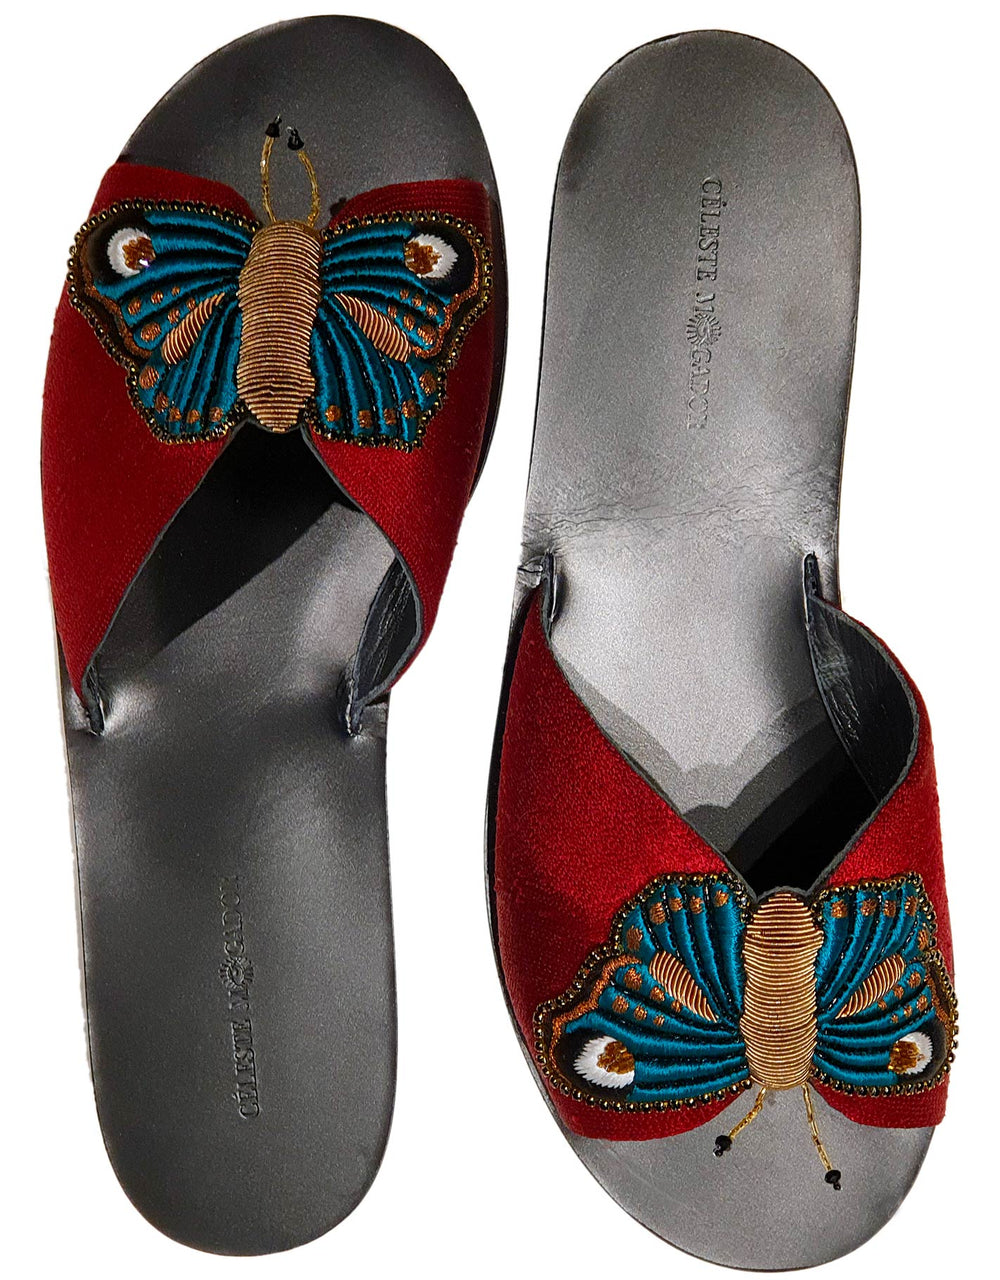 "Butterfly" sandals